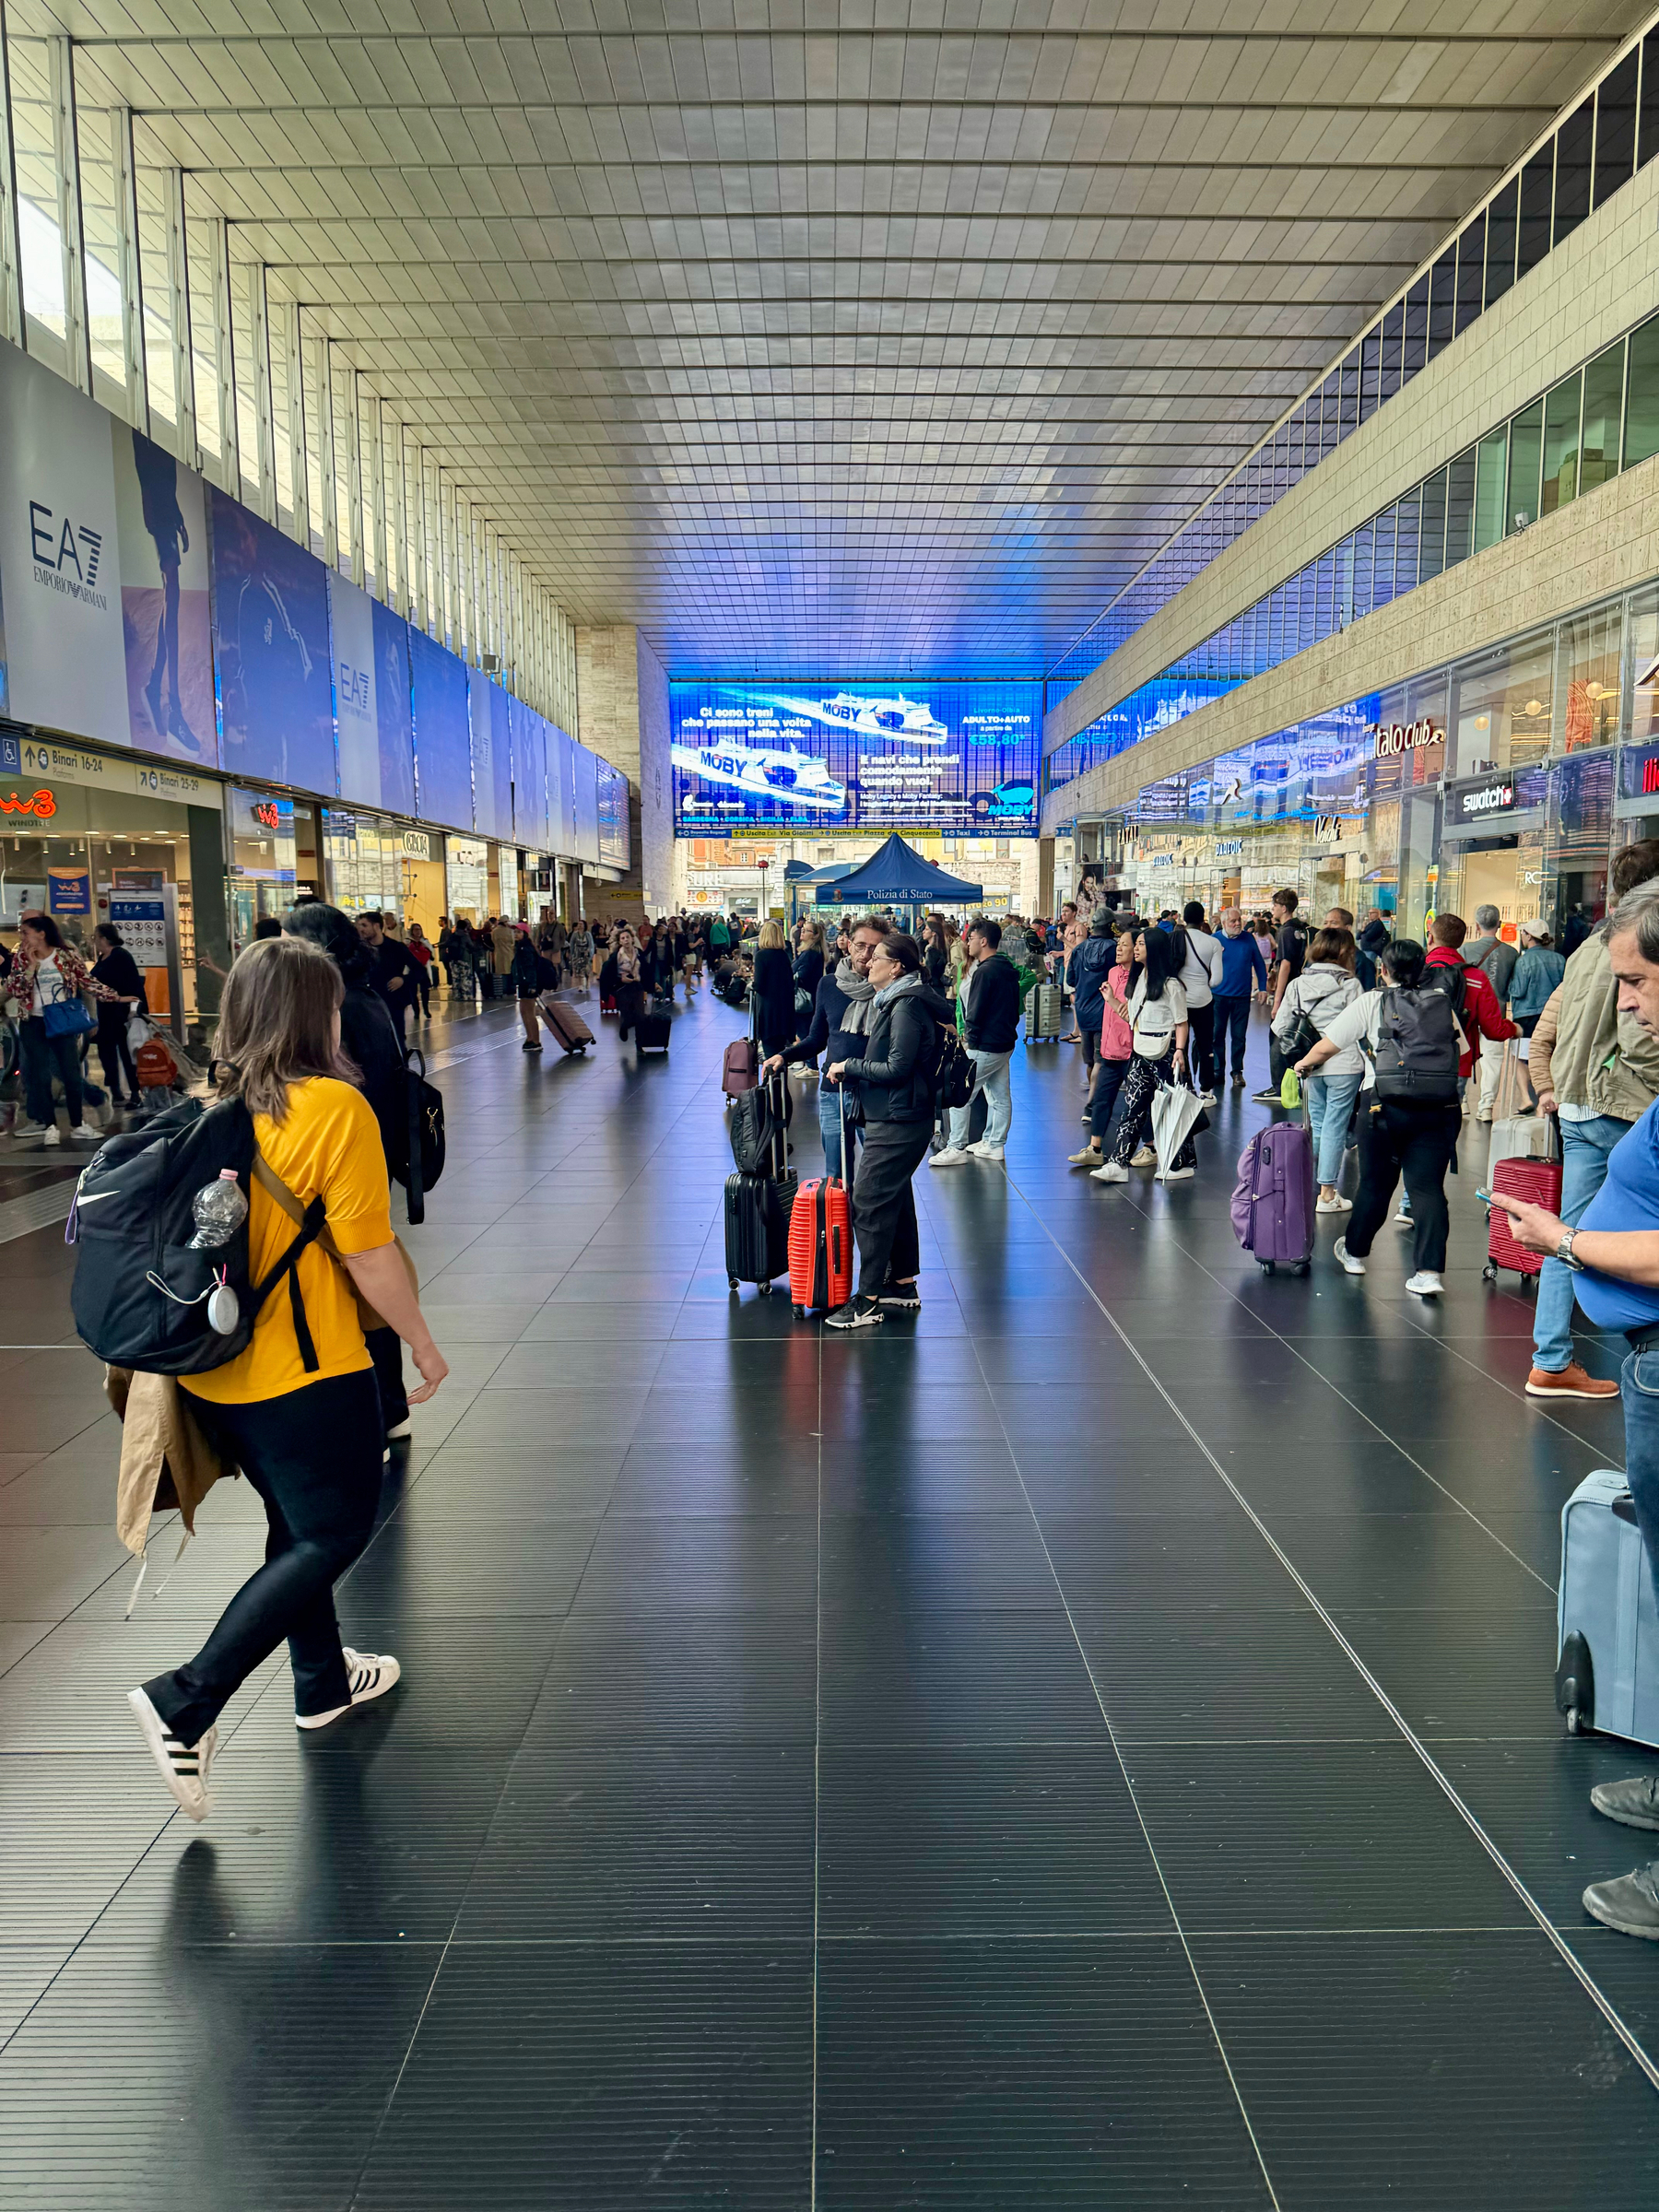 A busy interior of a train station with travelers pulling suitcases and standing in line. The station features a high ceiling, large digital displays, and various shops along both sides. The floor is tiled in black.